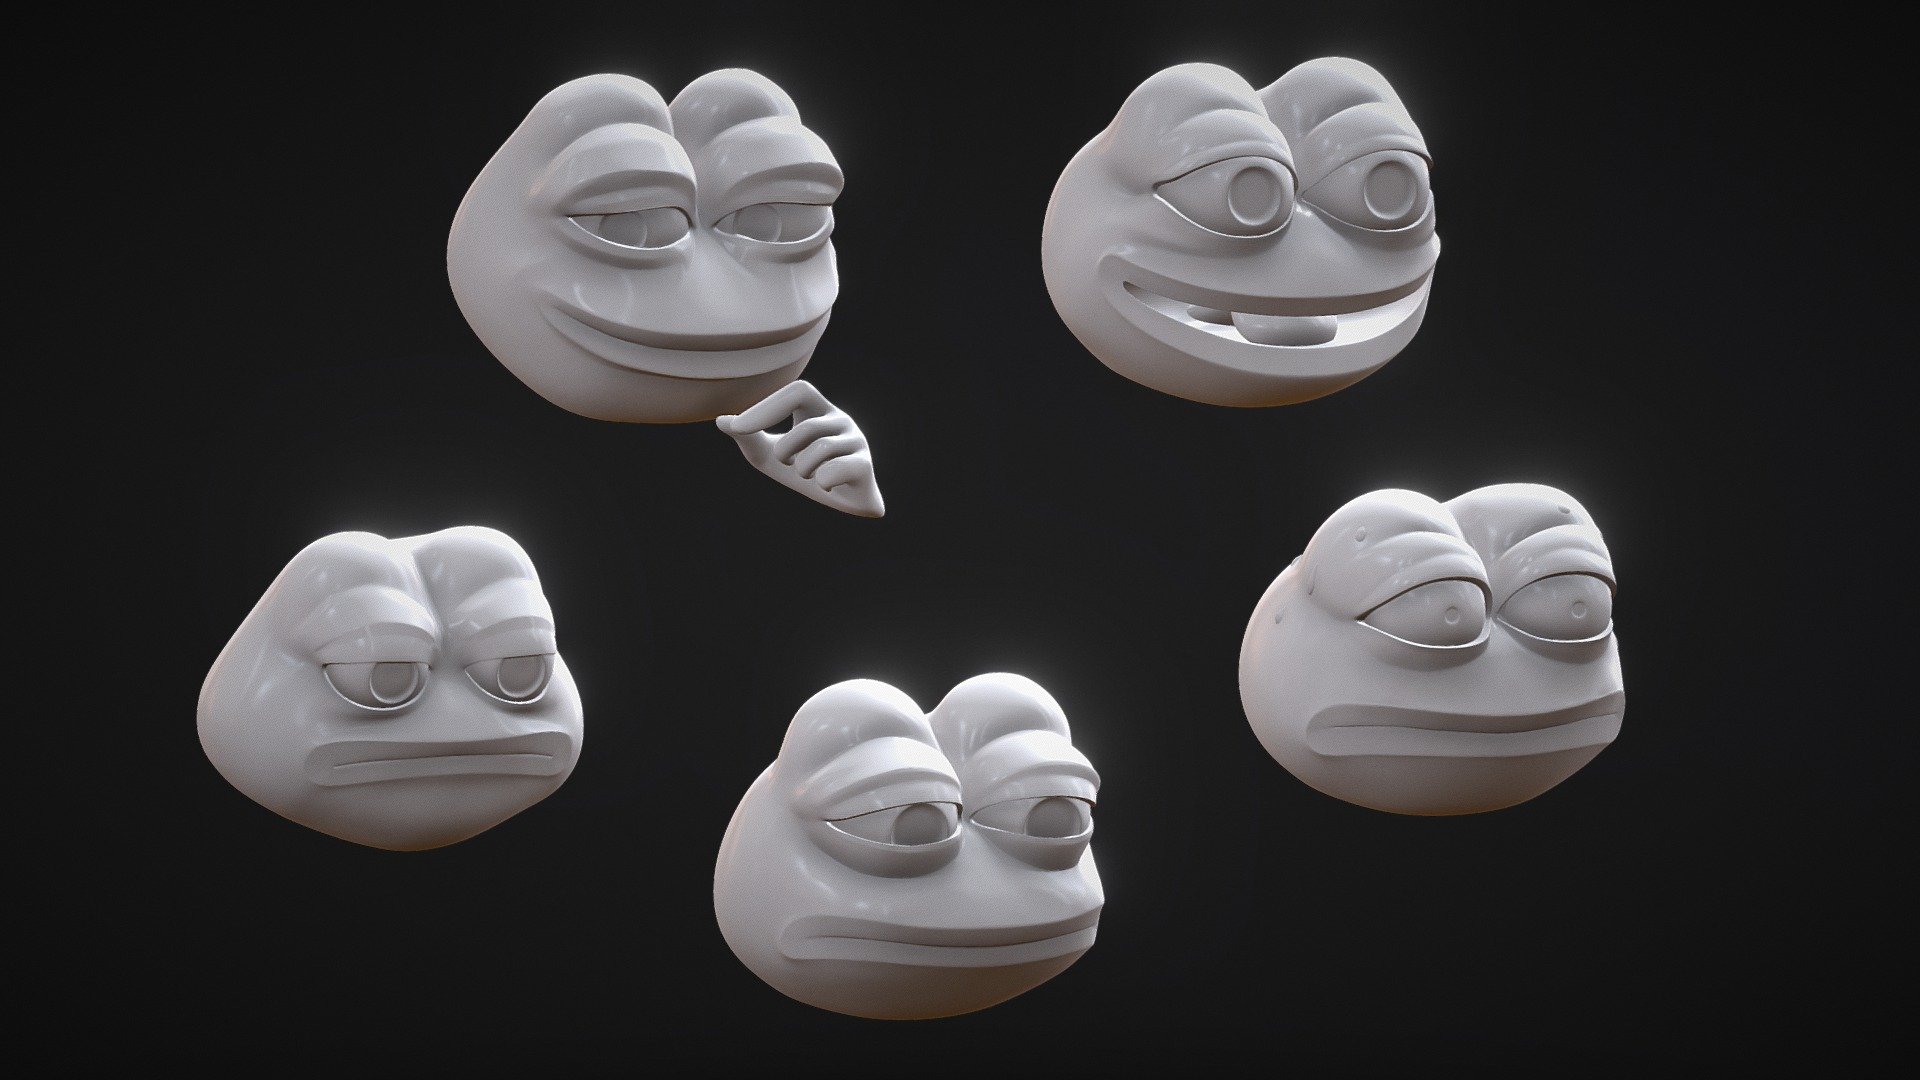 Pepe heads optimised specifically for 3D printing. Contain no cavities (excluding Feelsgoodman pepe's mouth). Please note that these pepes are fully merged: eyes, tongue cannot be separated.

All pepe heads come at 3 detail levels:




200k tris high poly pepes (featured here)

10k tris lower fidelity pepes

1-2k super low poly pepes (Also available separately: https://skfb.ly/ouxnY )

You can find fully quad smoothable and textured versions of these pepes here -&gt; https://sketchfab.com/xaeon/collections/aeons-pepes - Assorted Pepe Collection - 3D printing - Buy Royalty Free 3D model by ÆON (@xaeon) 3d model